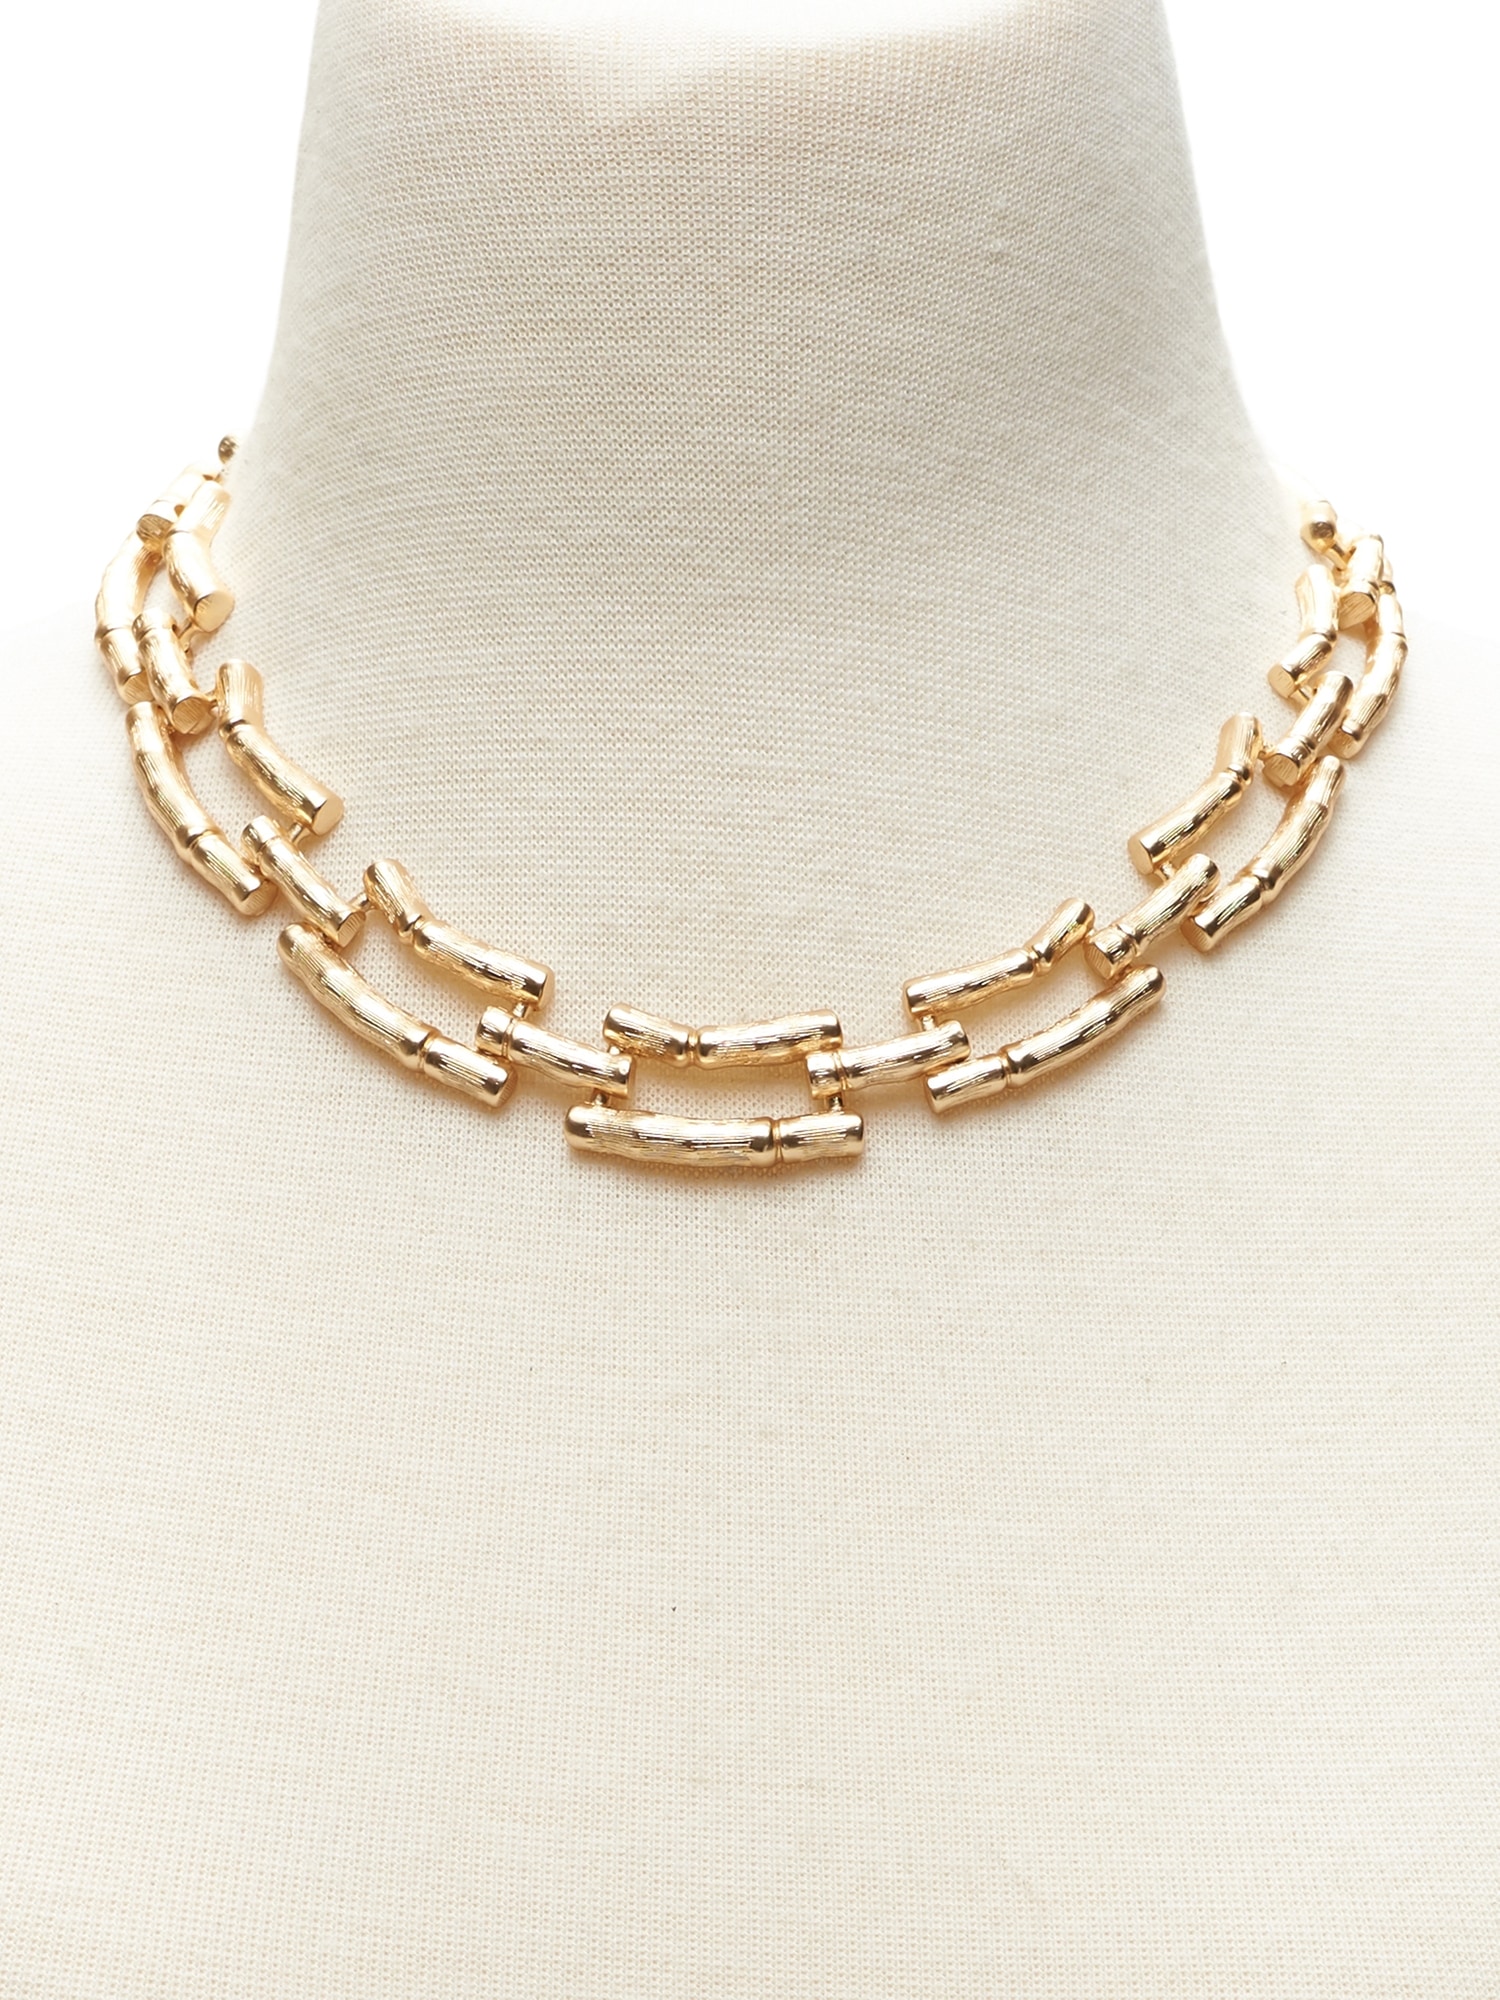 Gold Bamboo Necklace